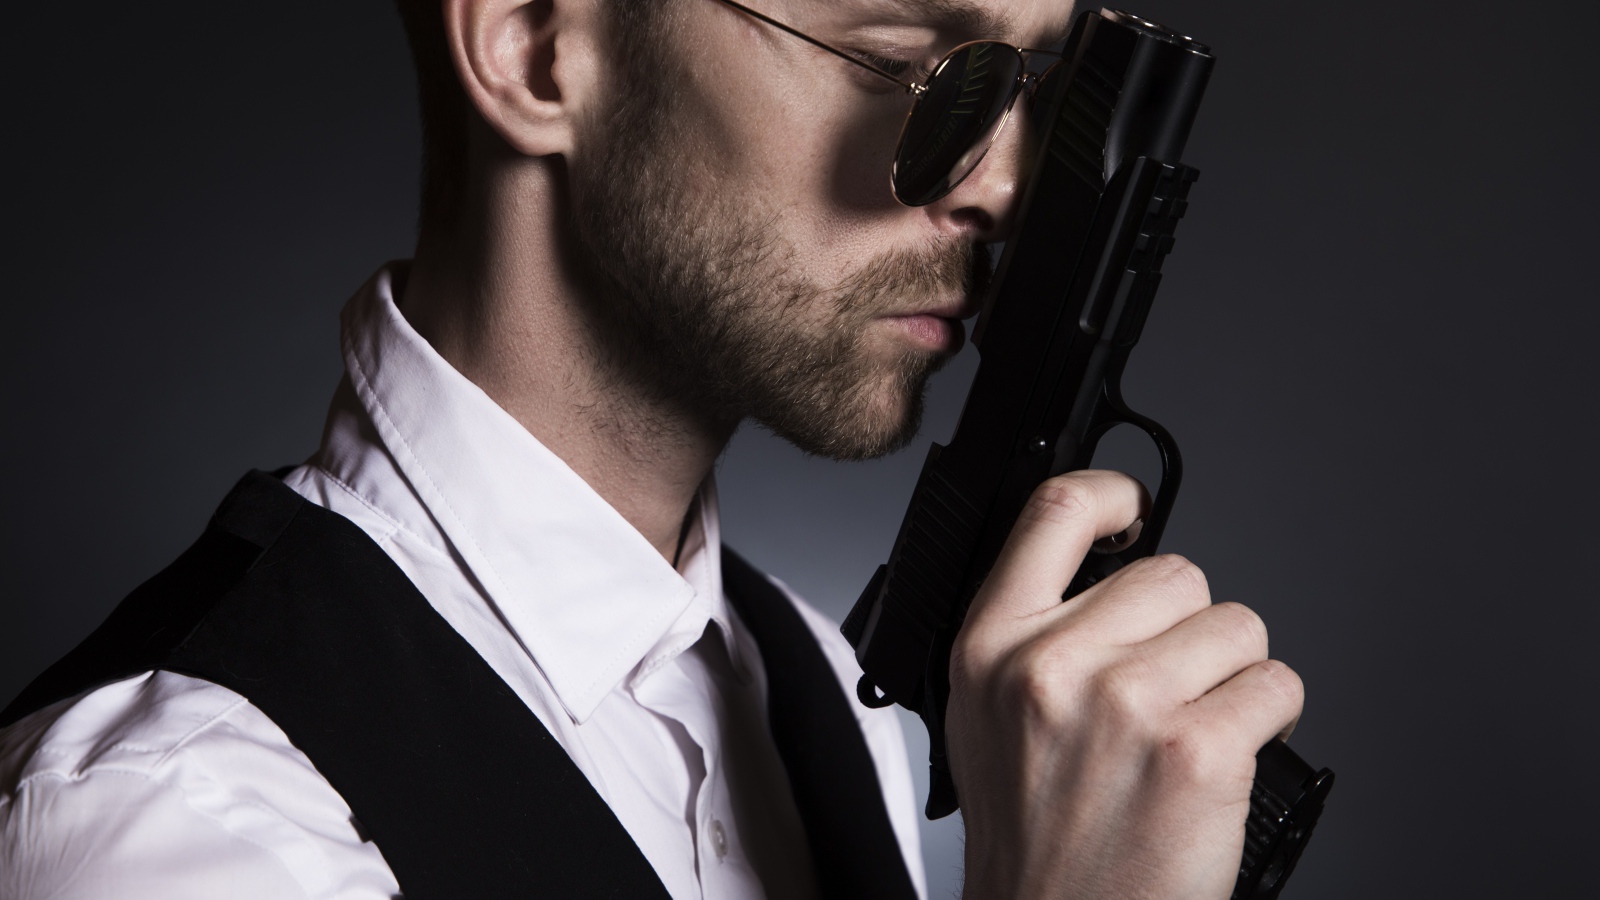 Man in glasses with a gun in his hand.